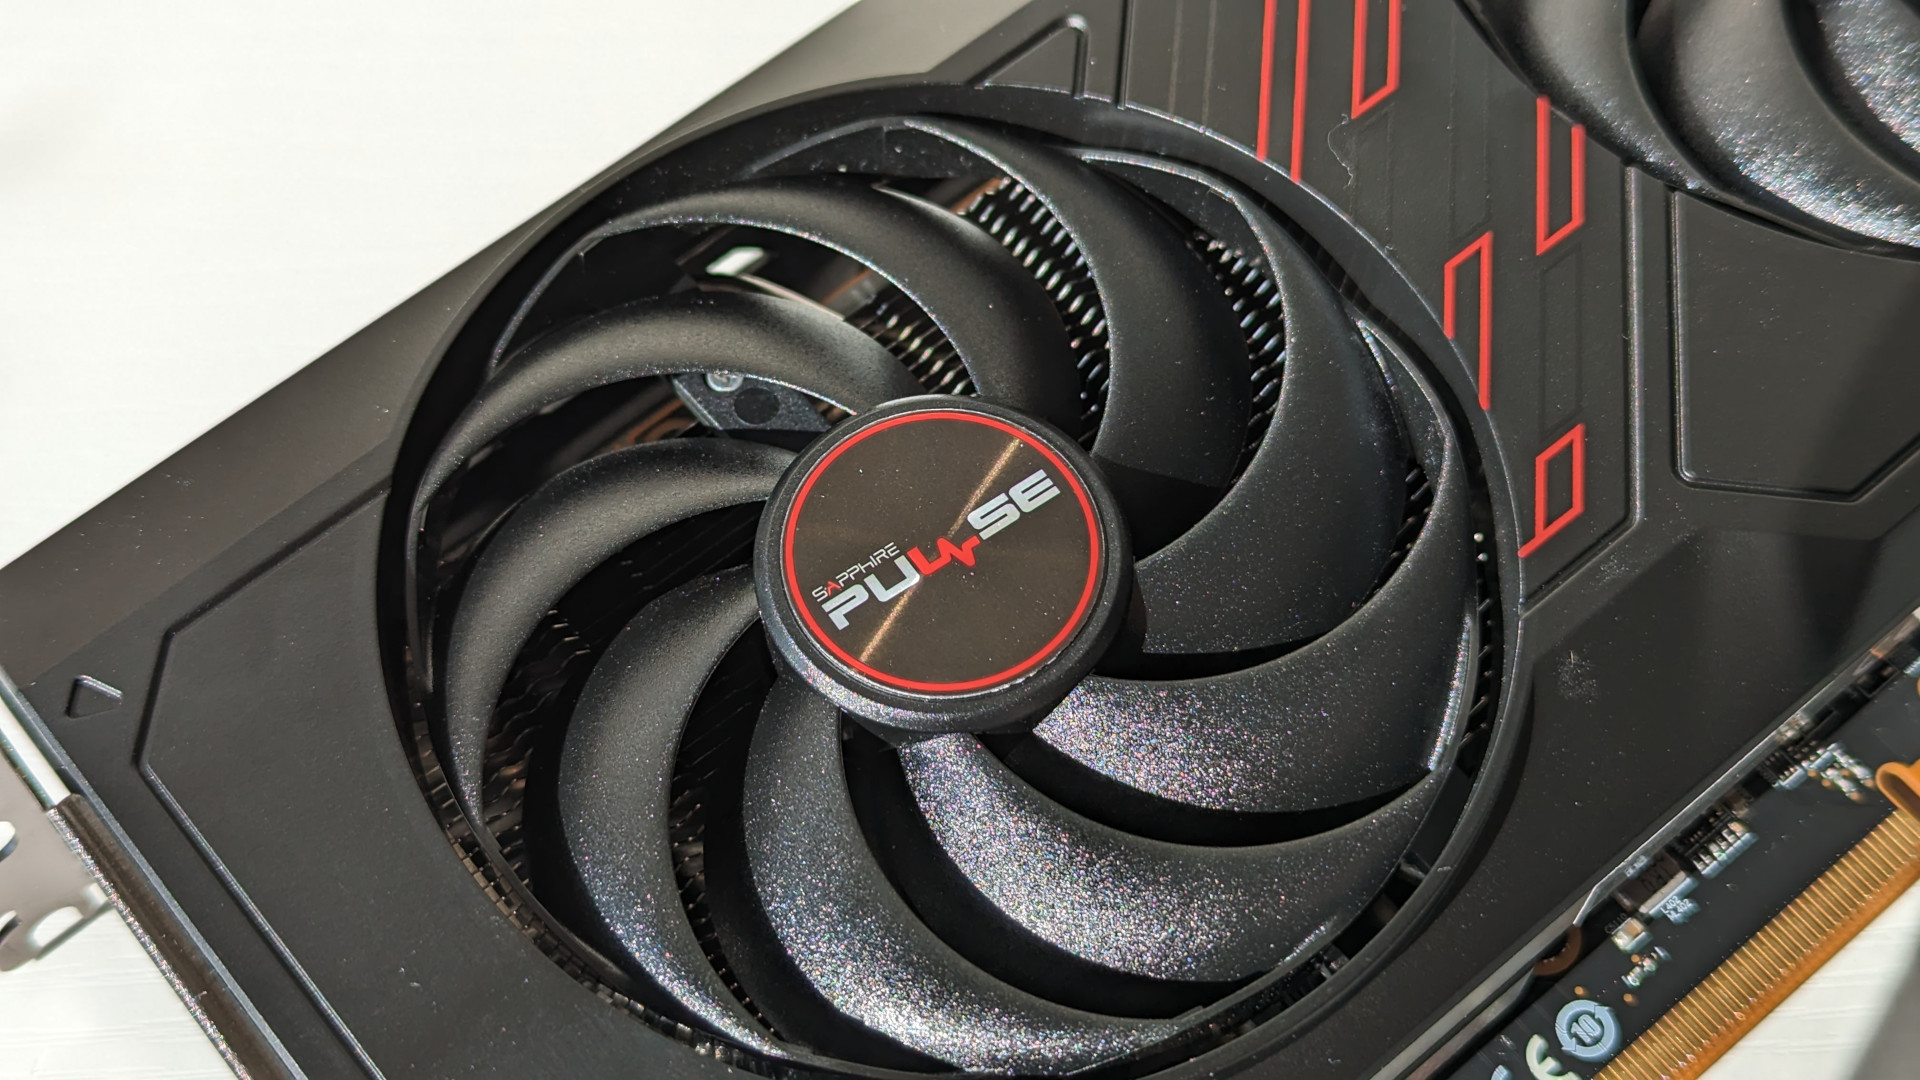 AMD Radeon RX 7600 review: A close-up of the graphics card's fan